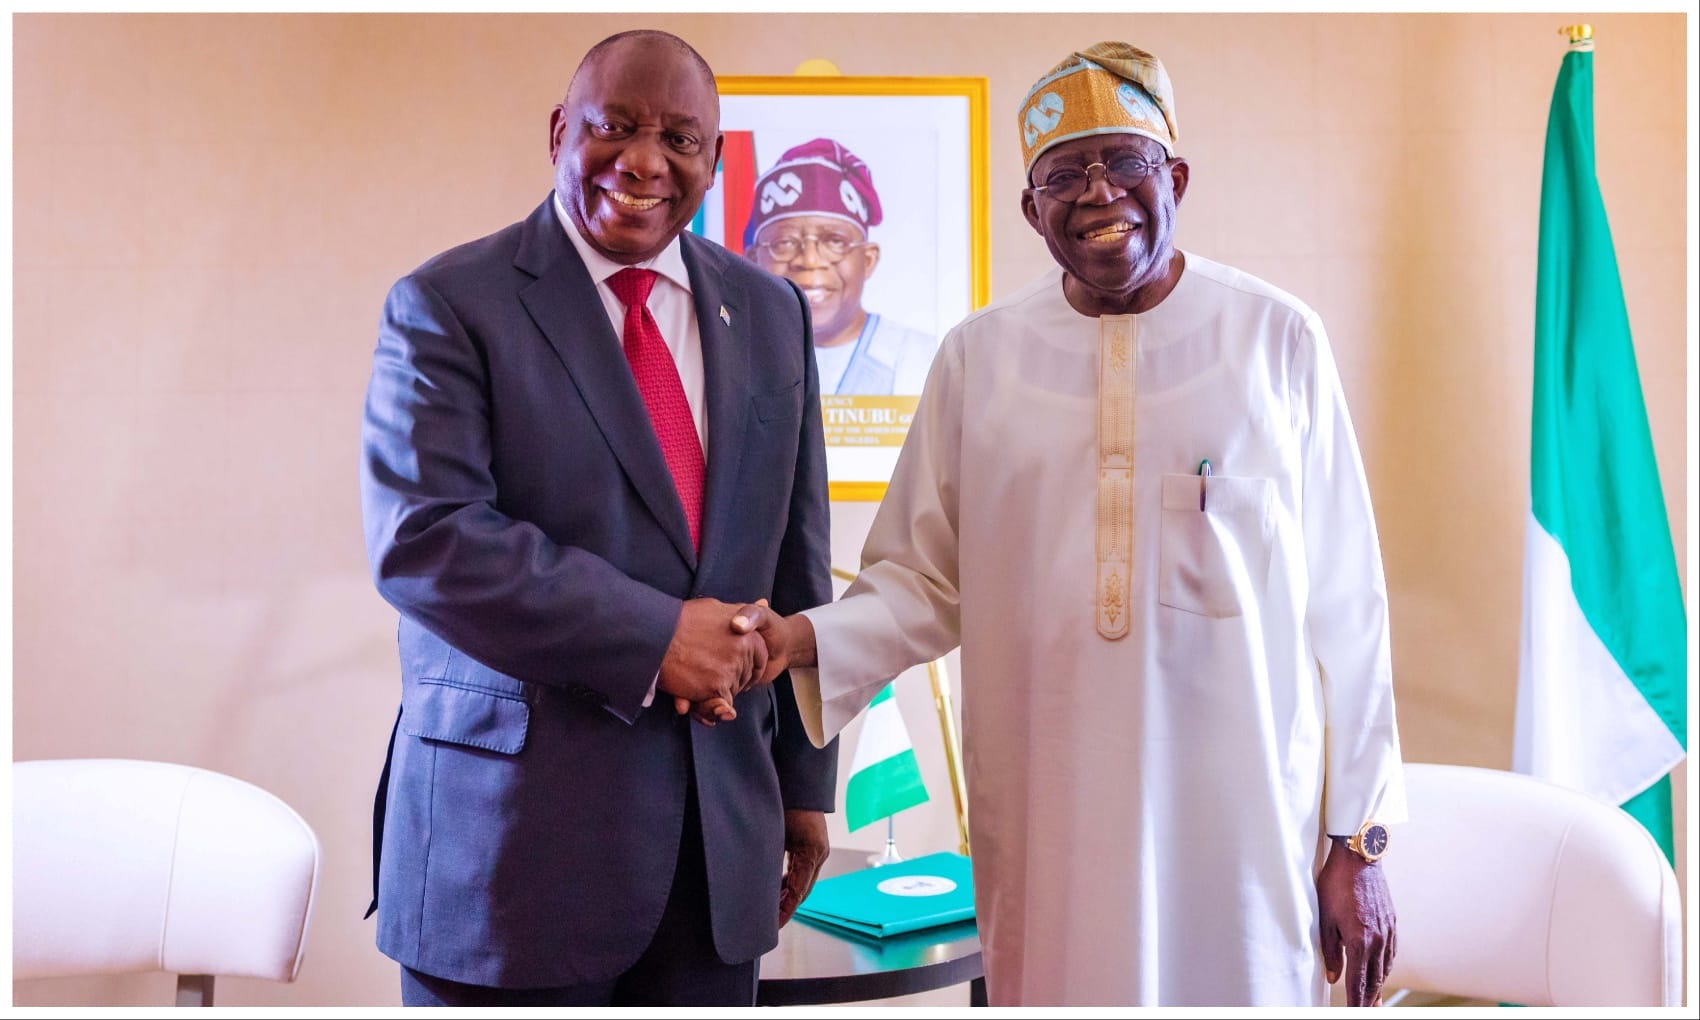 Tinubu and south Africa president